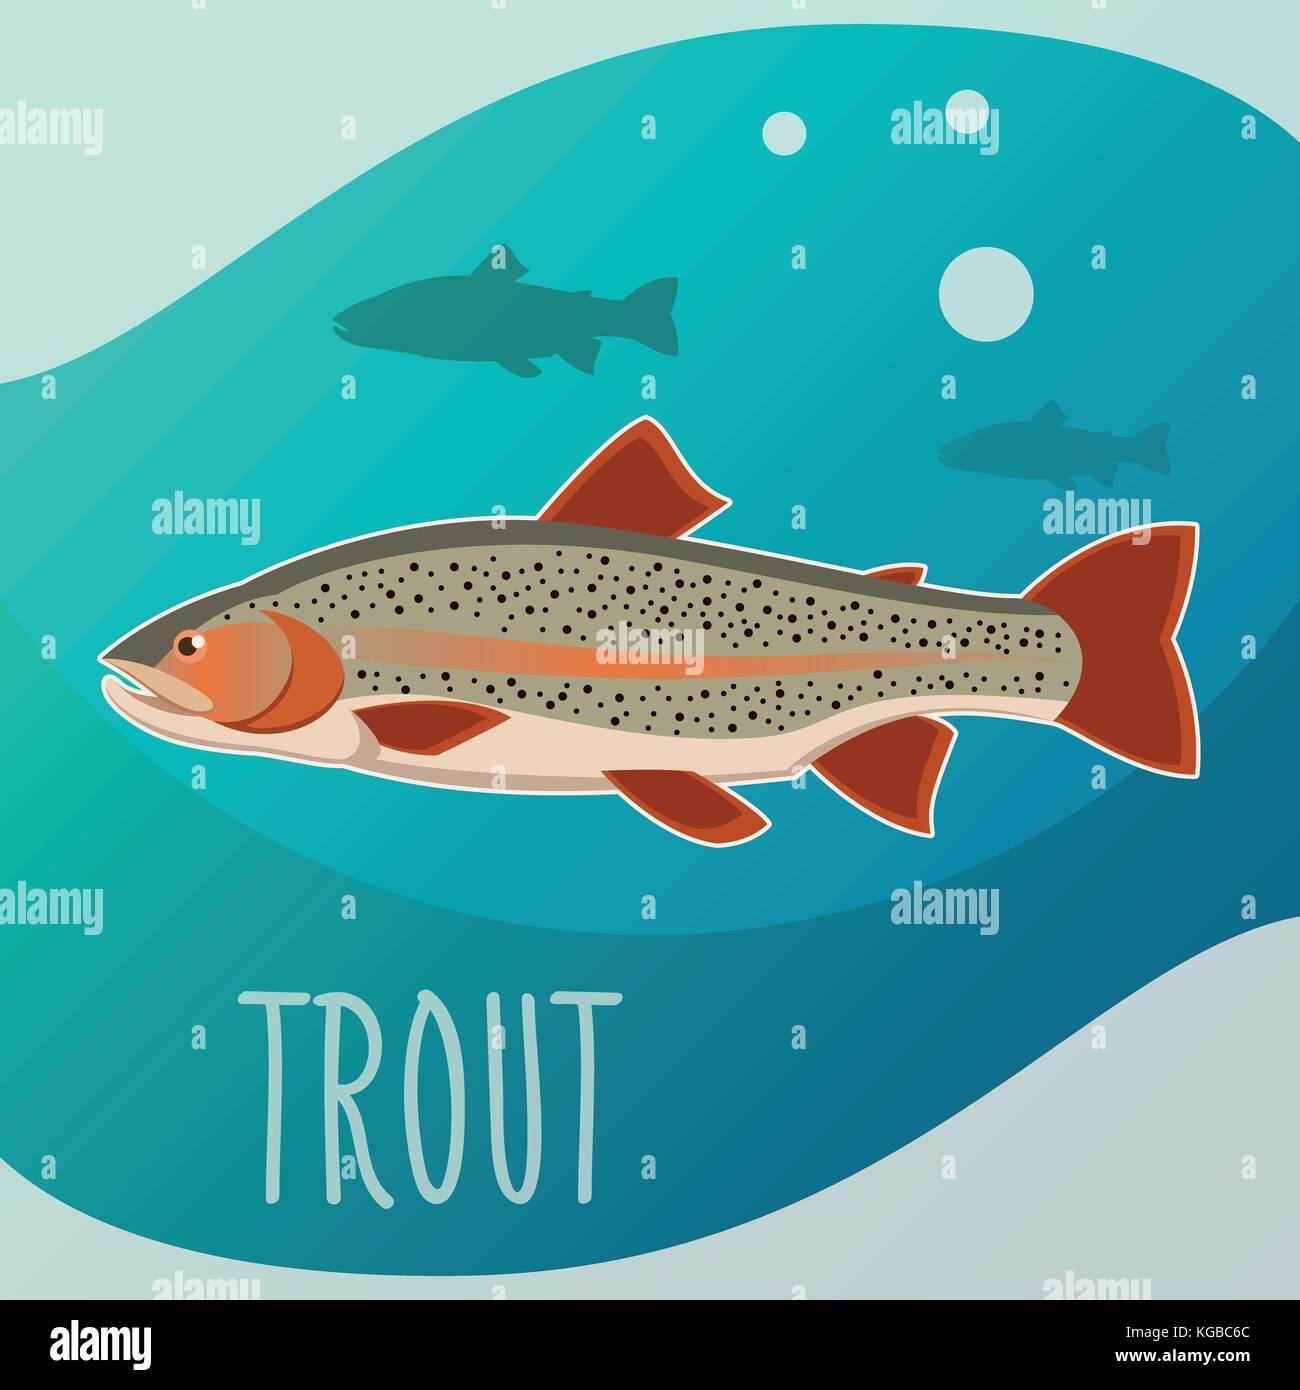 Trout fish banner Stock Vector